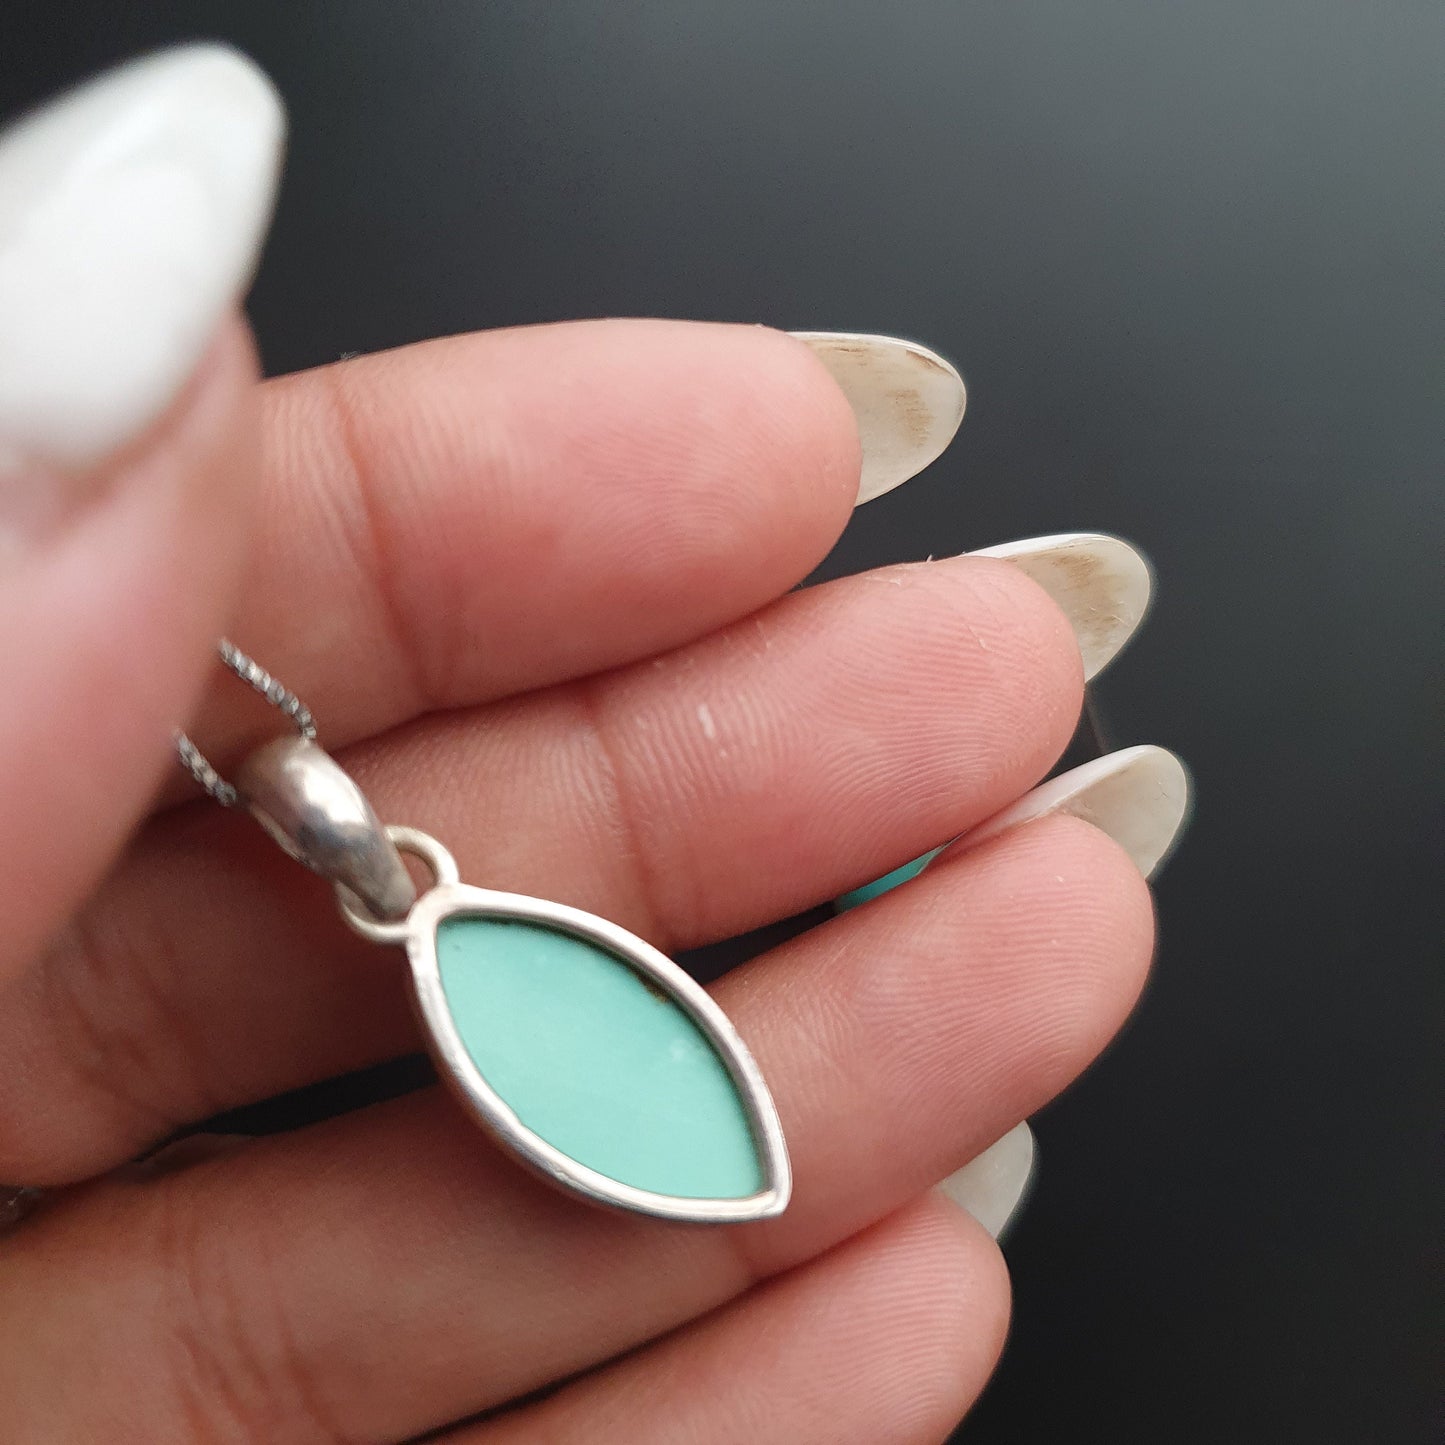 Set, earrings pendant sets, turquoise, sterling silver, Teardrop, vintage, handmade,gifts, classical earrings and pendant sets